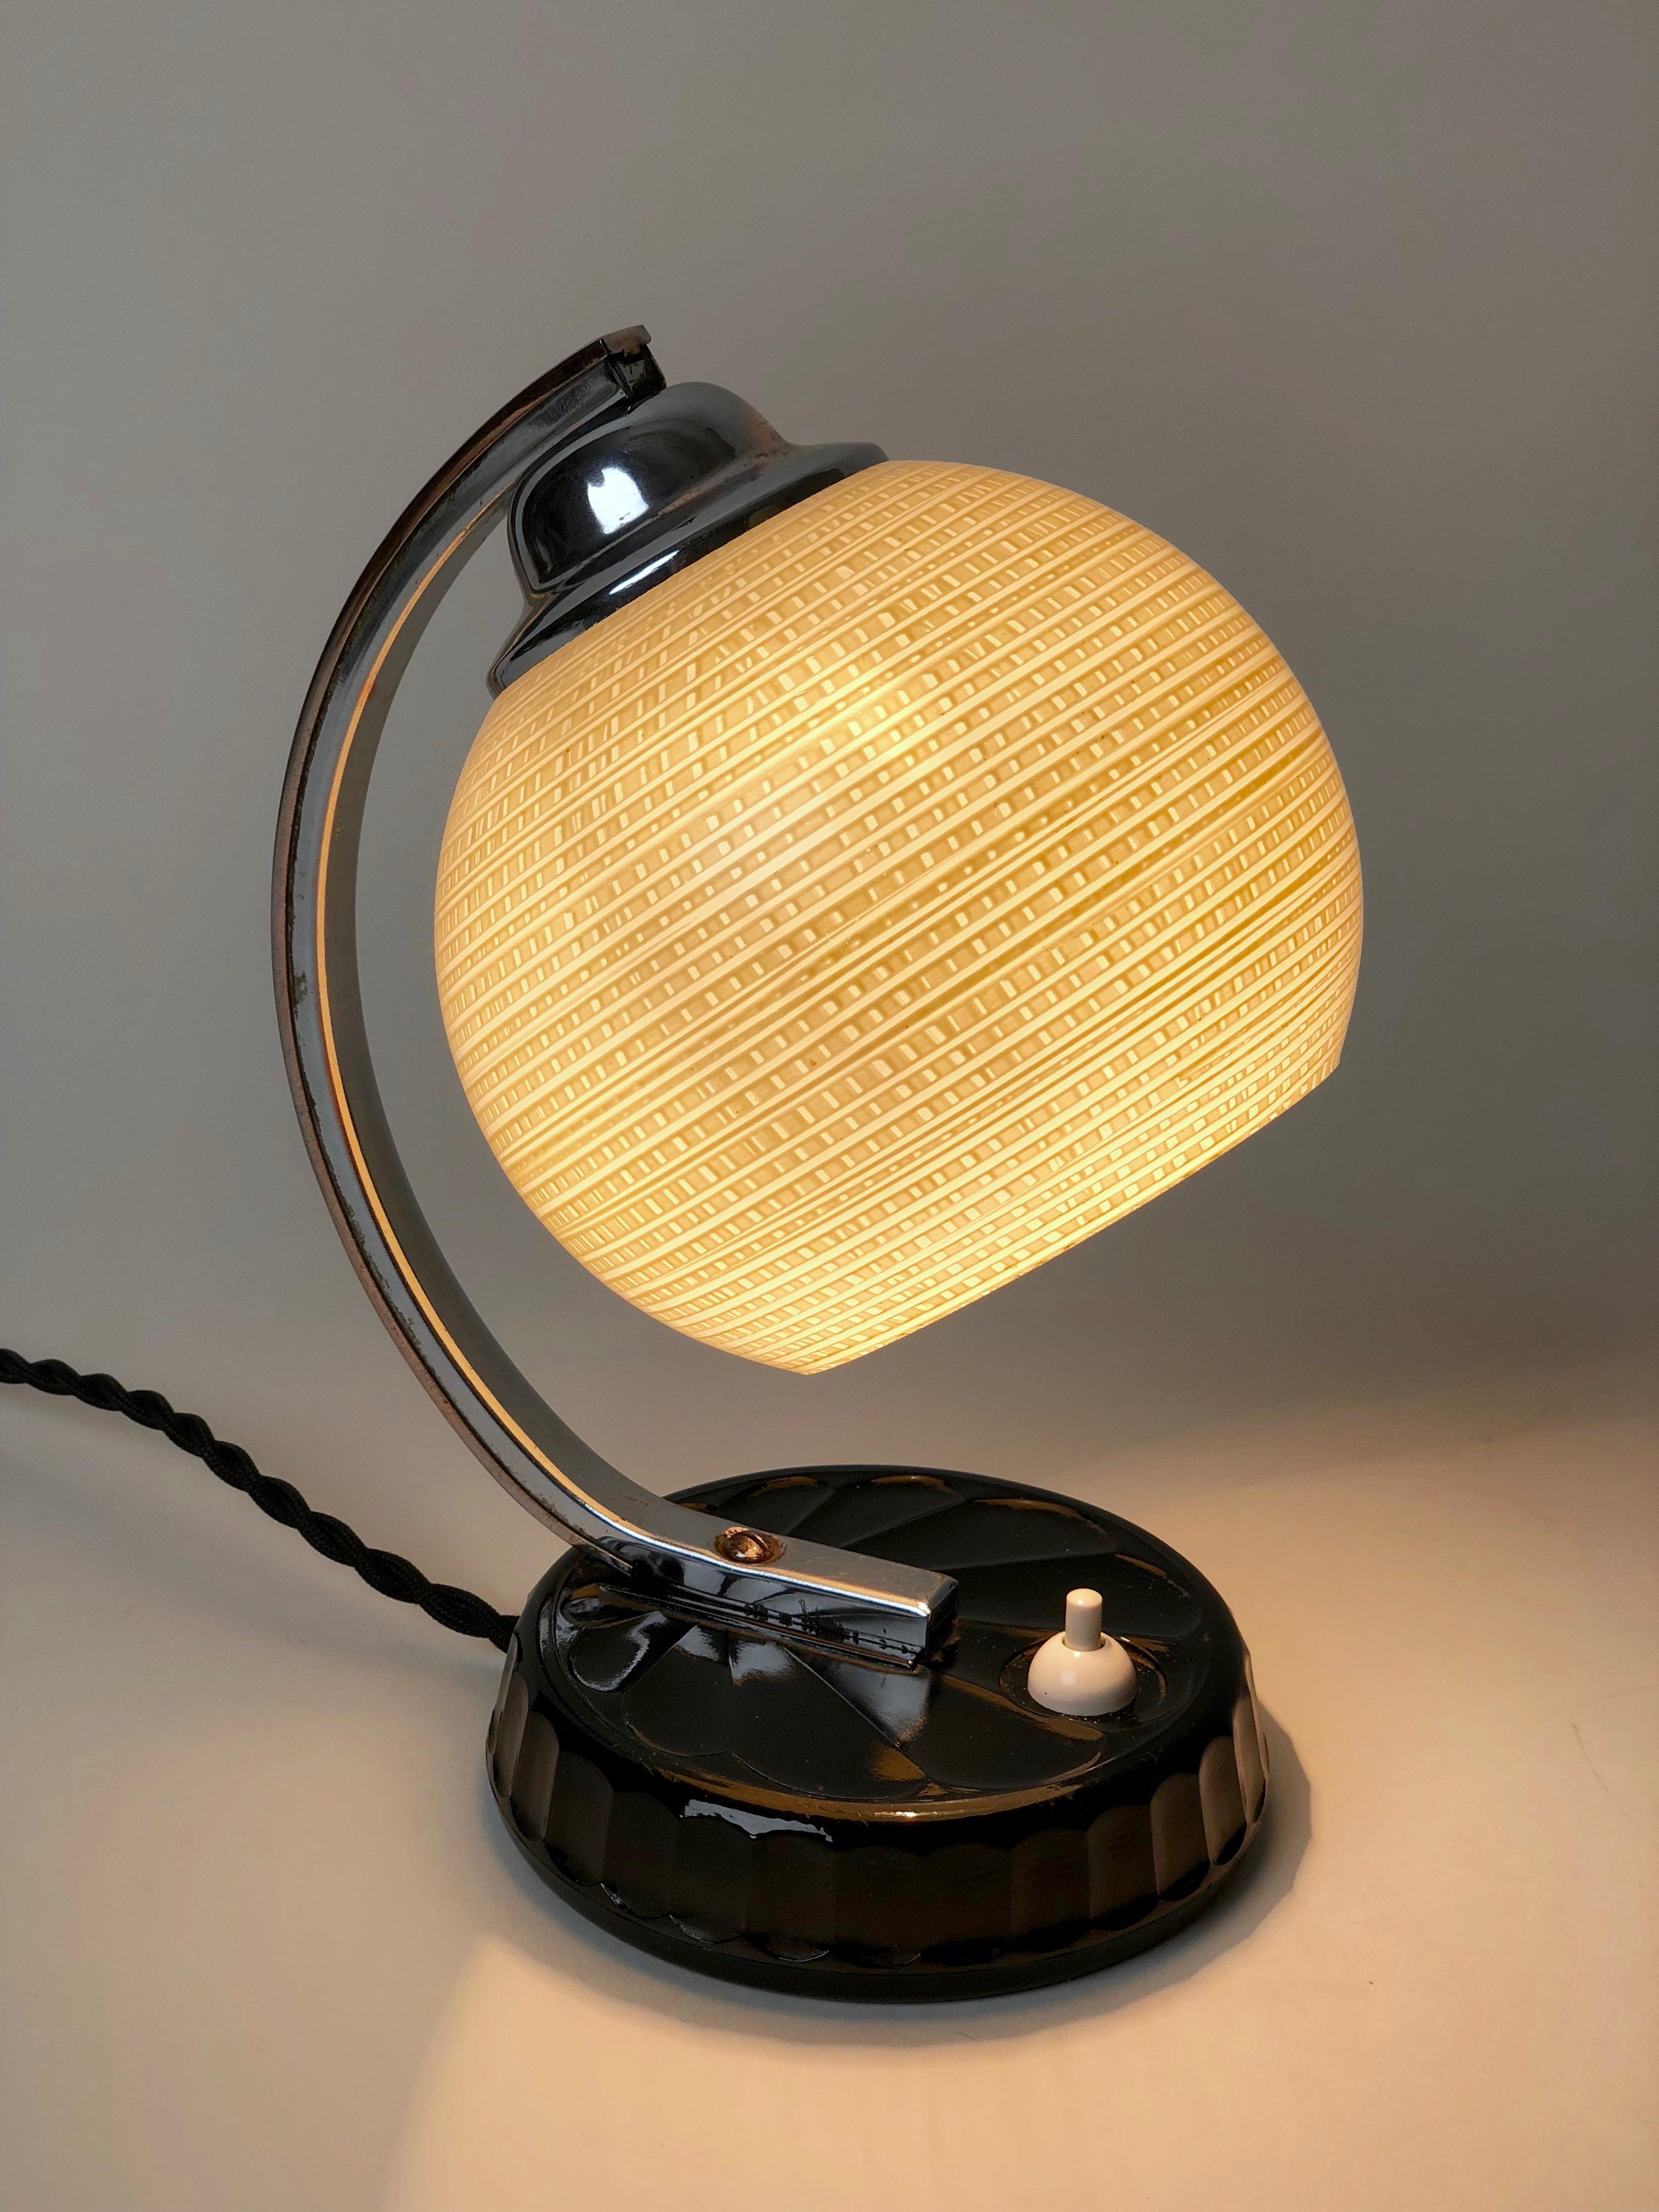 Art Deco table lamp from the Czech Republic, produced in the 1920s-1930s, from CMS Krasno. The base of the lamp looks like it is made of Bakelite, but in fact, it is made from Industrial ceramic, and glazed to look similar to Bakelite. On the bottom